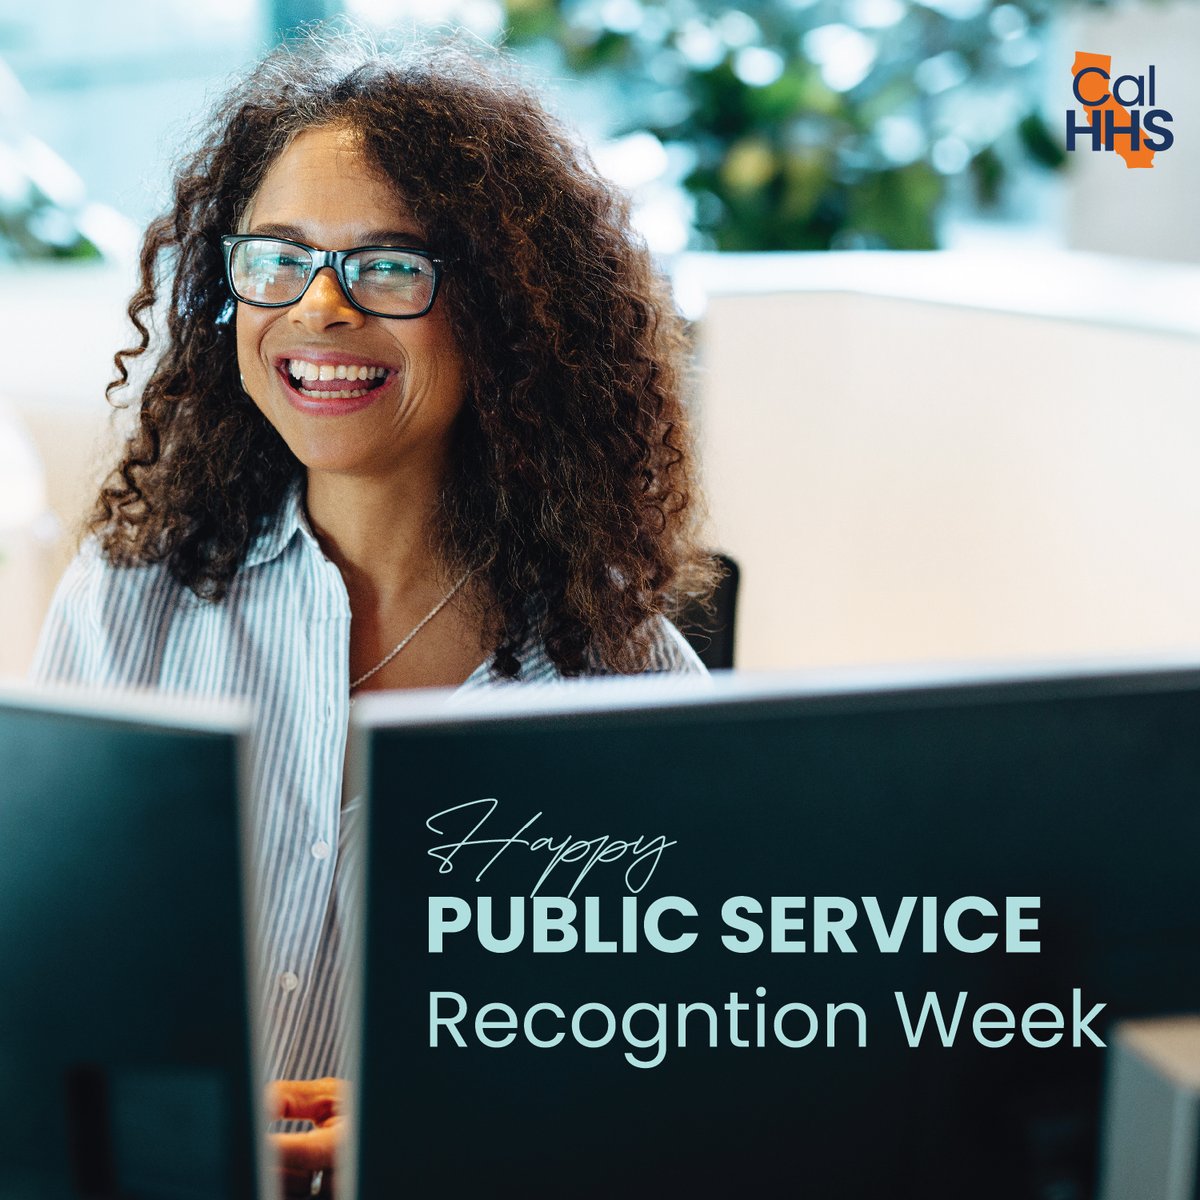 A Healthy #CaliforniaForAll is made possible through the 37,000+ public servants across CalHHS.

Thank you for your dedication & commitment to safeguarding the health & wellbeing of all Californians! #PSRW